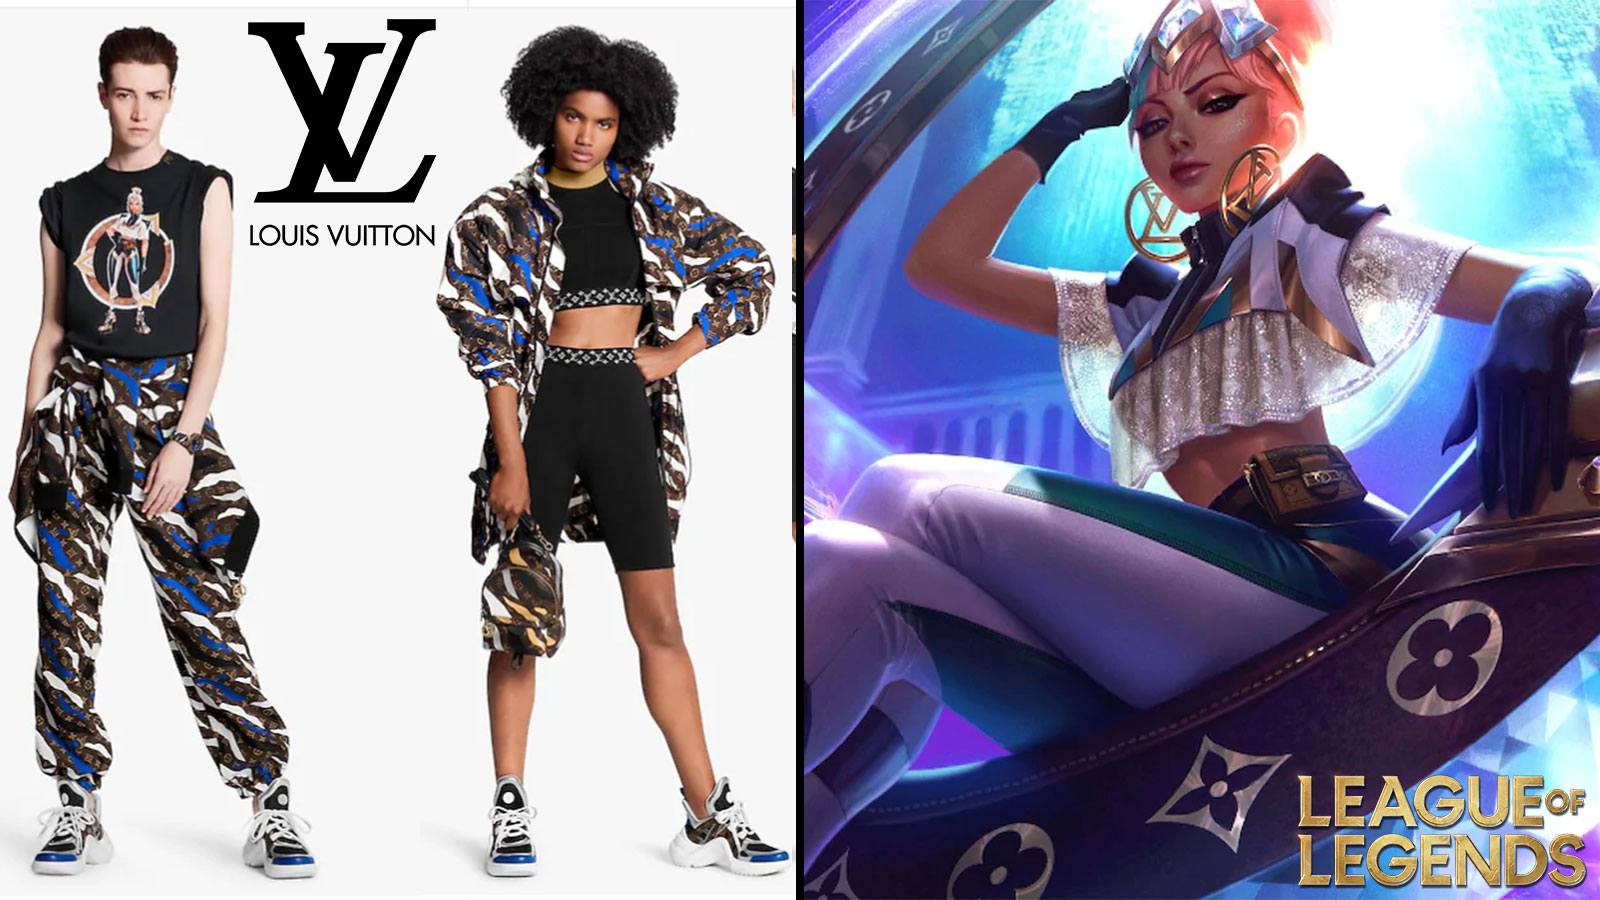 Louis Vuitton  Qiyana in Louis Vuitton by Nicolas Ghesquière The League  of Legends champions new prestige skin will be released during the Worlds  2019 Championship Finals See more from the Maisons